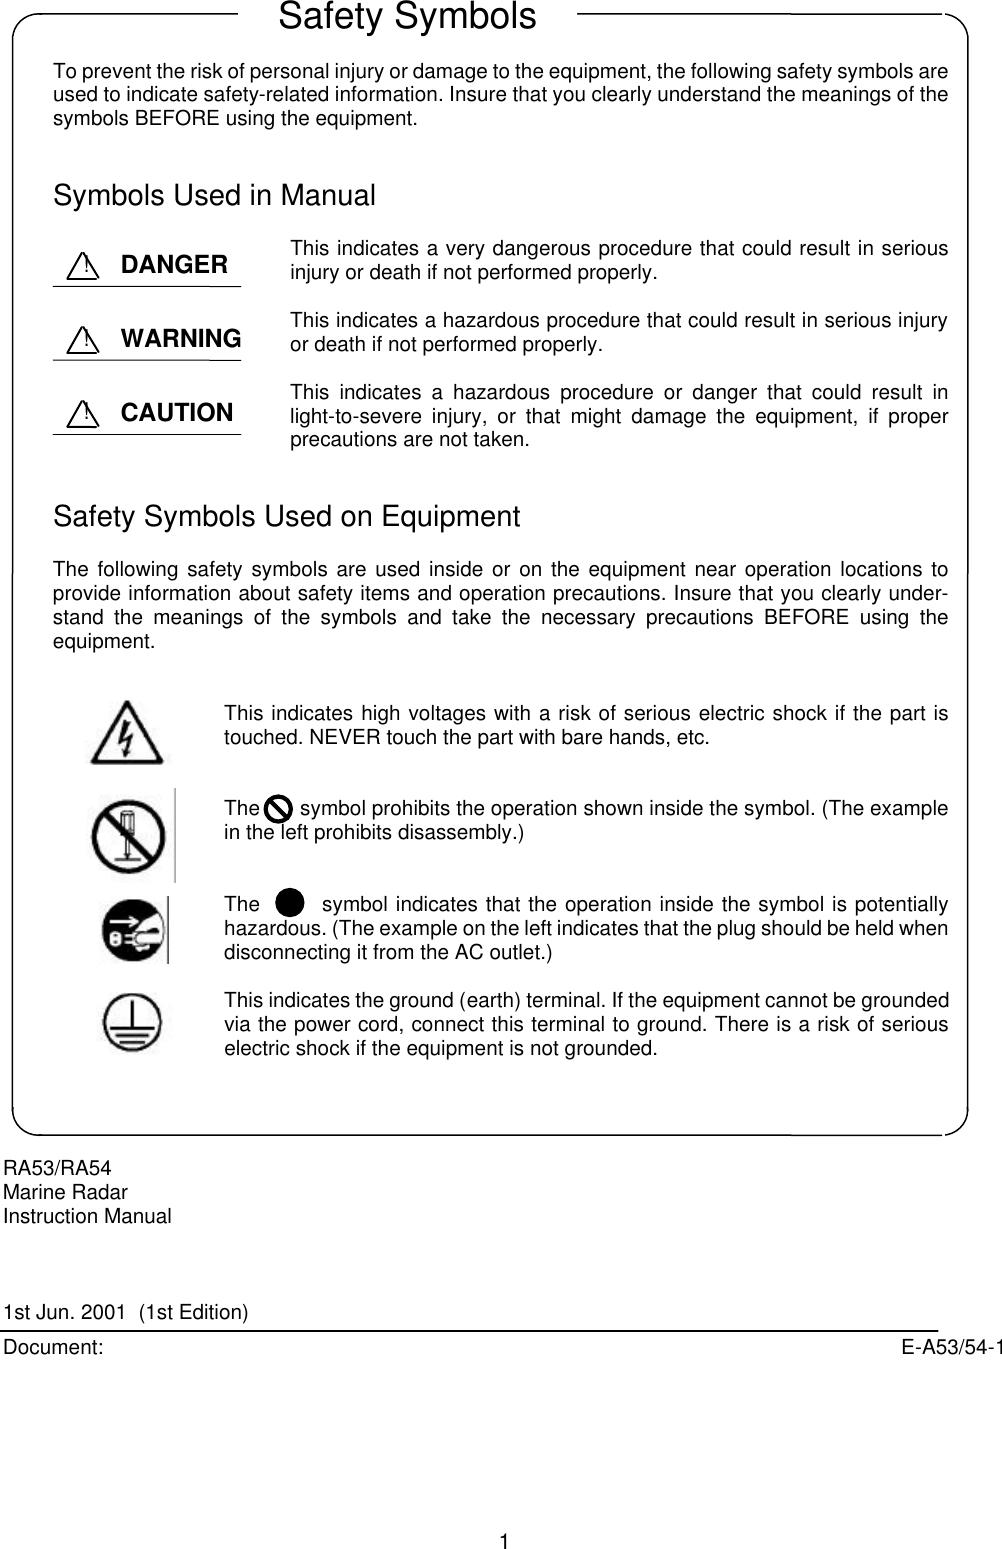  1    To prevent the risk of personal injury or damage to the equipment, the following safety symbols are used to indicate safety-related information. Insure that you clearly understand the meanings of the symbols BEFORE using the equipment.   Symbols Used in Manual  This indicates a very dangerous procedure that could result in serious injury or death if not performed properly.  This indicates a hazardous procedure that could result in serious injury or death if not performed properly.  This indicates a hazardous procedure or danger that could result in light-to-severe injury, or that might damage the equipment, if proper precautions are not taken.   Safety Symbols Used on Equipment  The following safety symbols are used inside or on the equipment near operation locations to provide information about safety items and operation precautions. Insure that you clearly under-stand the meanings of the symbols and take the necessary precautions BEFORE using the equipment.   This indicates high voltages with a risk of serious electric shock if the part is touched. NEVER touch the part with bare hands, etc.   The       symbol prohibits the operation shown inside the symbol. (The example in the left prohibits disassembly.)   The        symbol indicates that the operation inside the symbol is potentially hazardous. (The example on the left indicates that the plug should be held when disconnecting it from the AC outlet.)  This indicates the ground (earth) terminal. If the equipment cannot be grounded via the power cord, connect this terminal to ground. There is a risk of serious electric shock if the equipment is not grounded.     RA53/RA54 Marine Radar Instruction Manual    1st Jun. 2001  (1st Edition) Document: E-A53/54-1Safety Symbols DANGER ! WARNING ! CAUTION !  